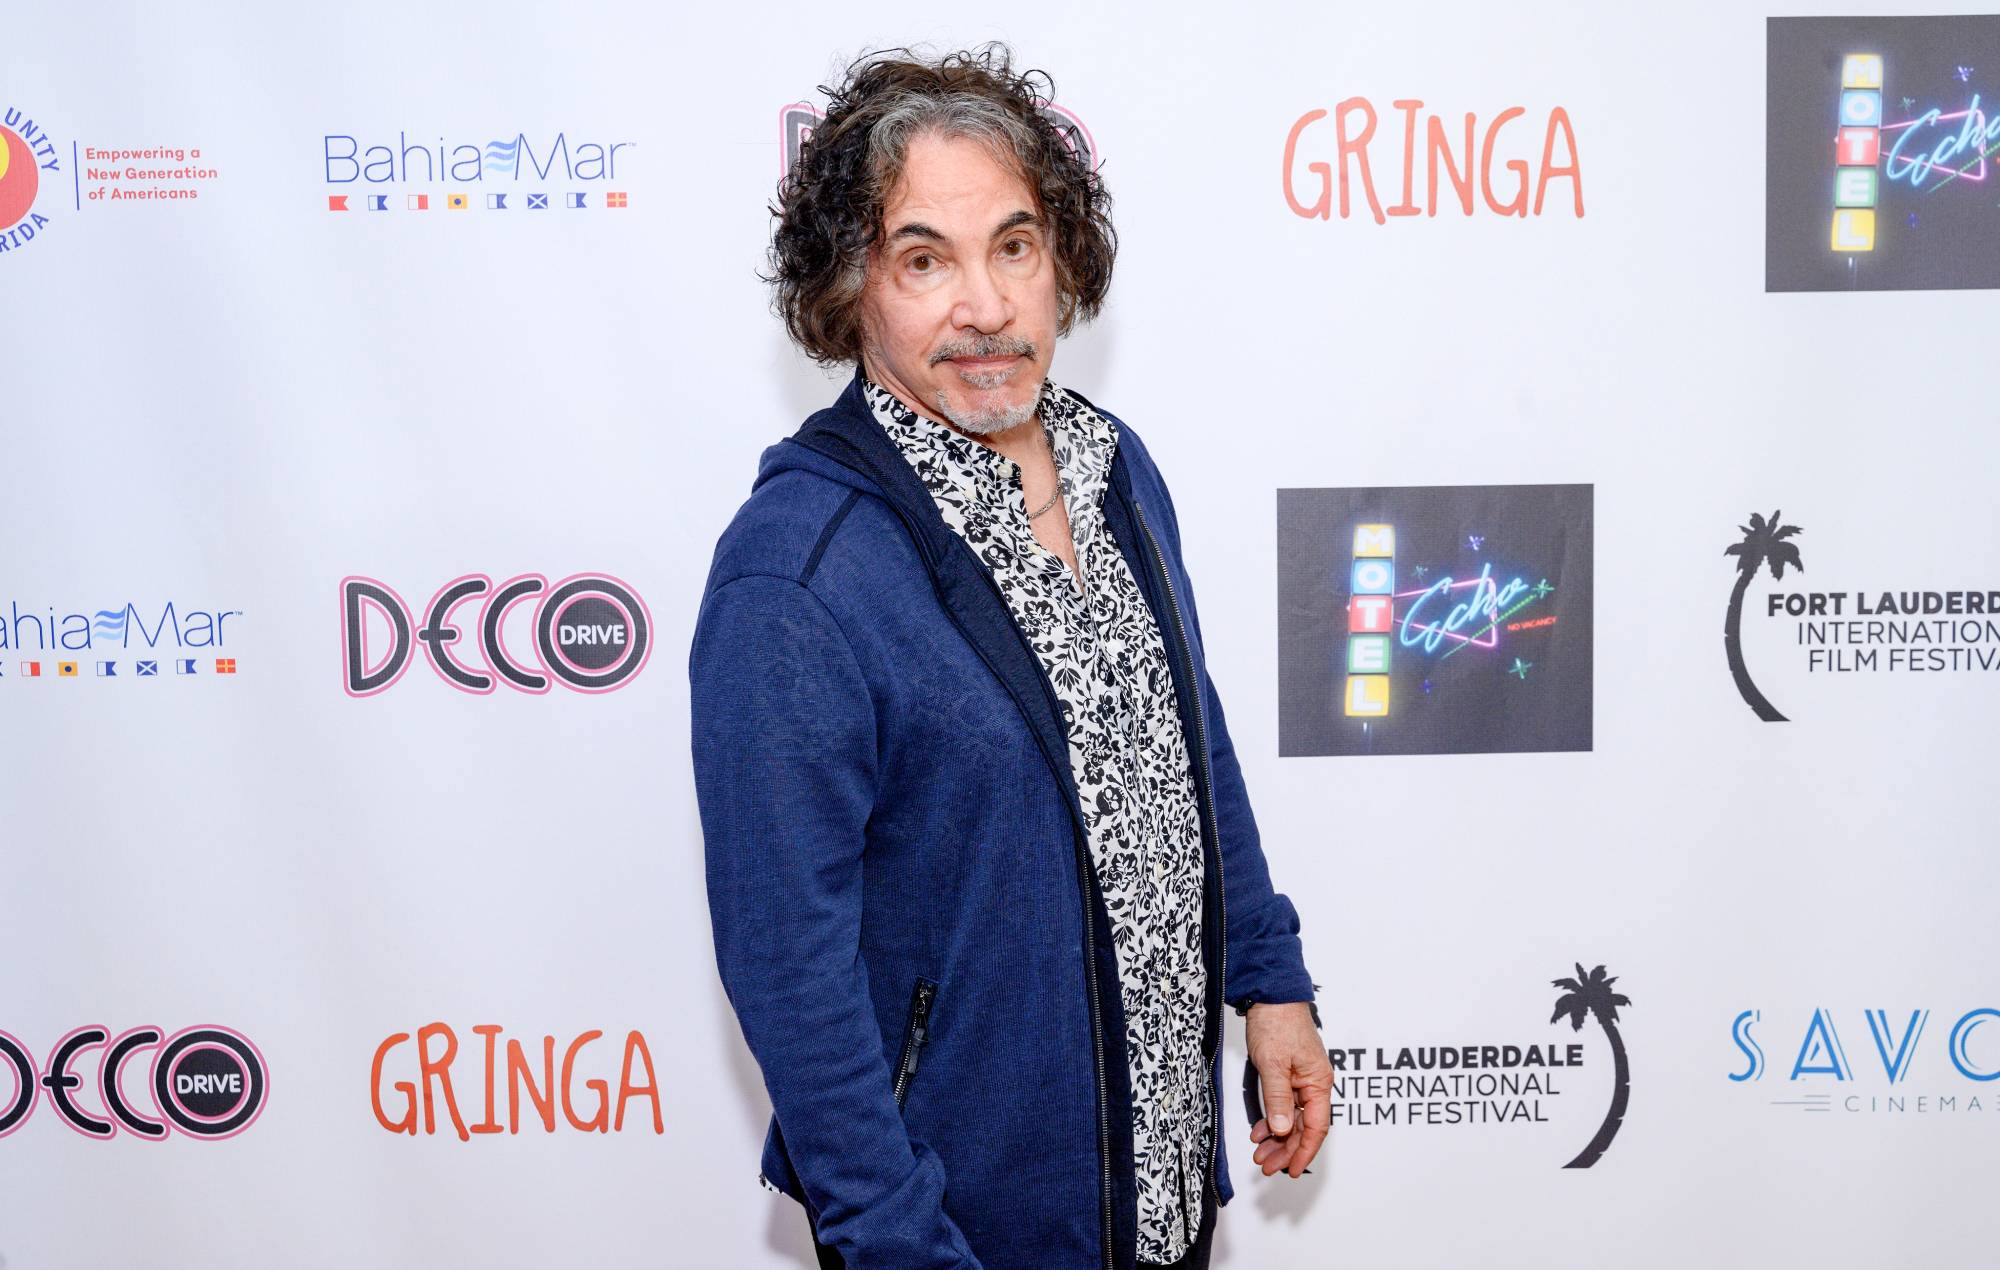 John Oates shoots down Hall & Oates reunion and says he has “moved on”